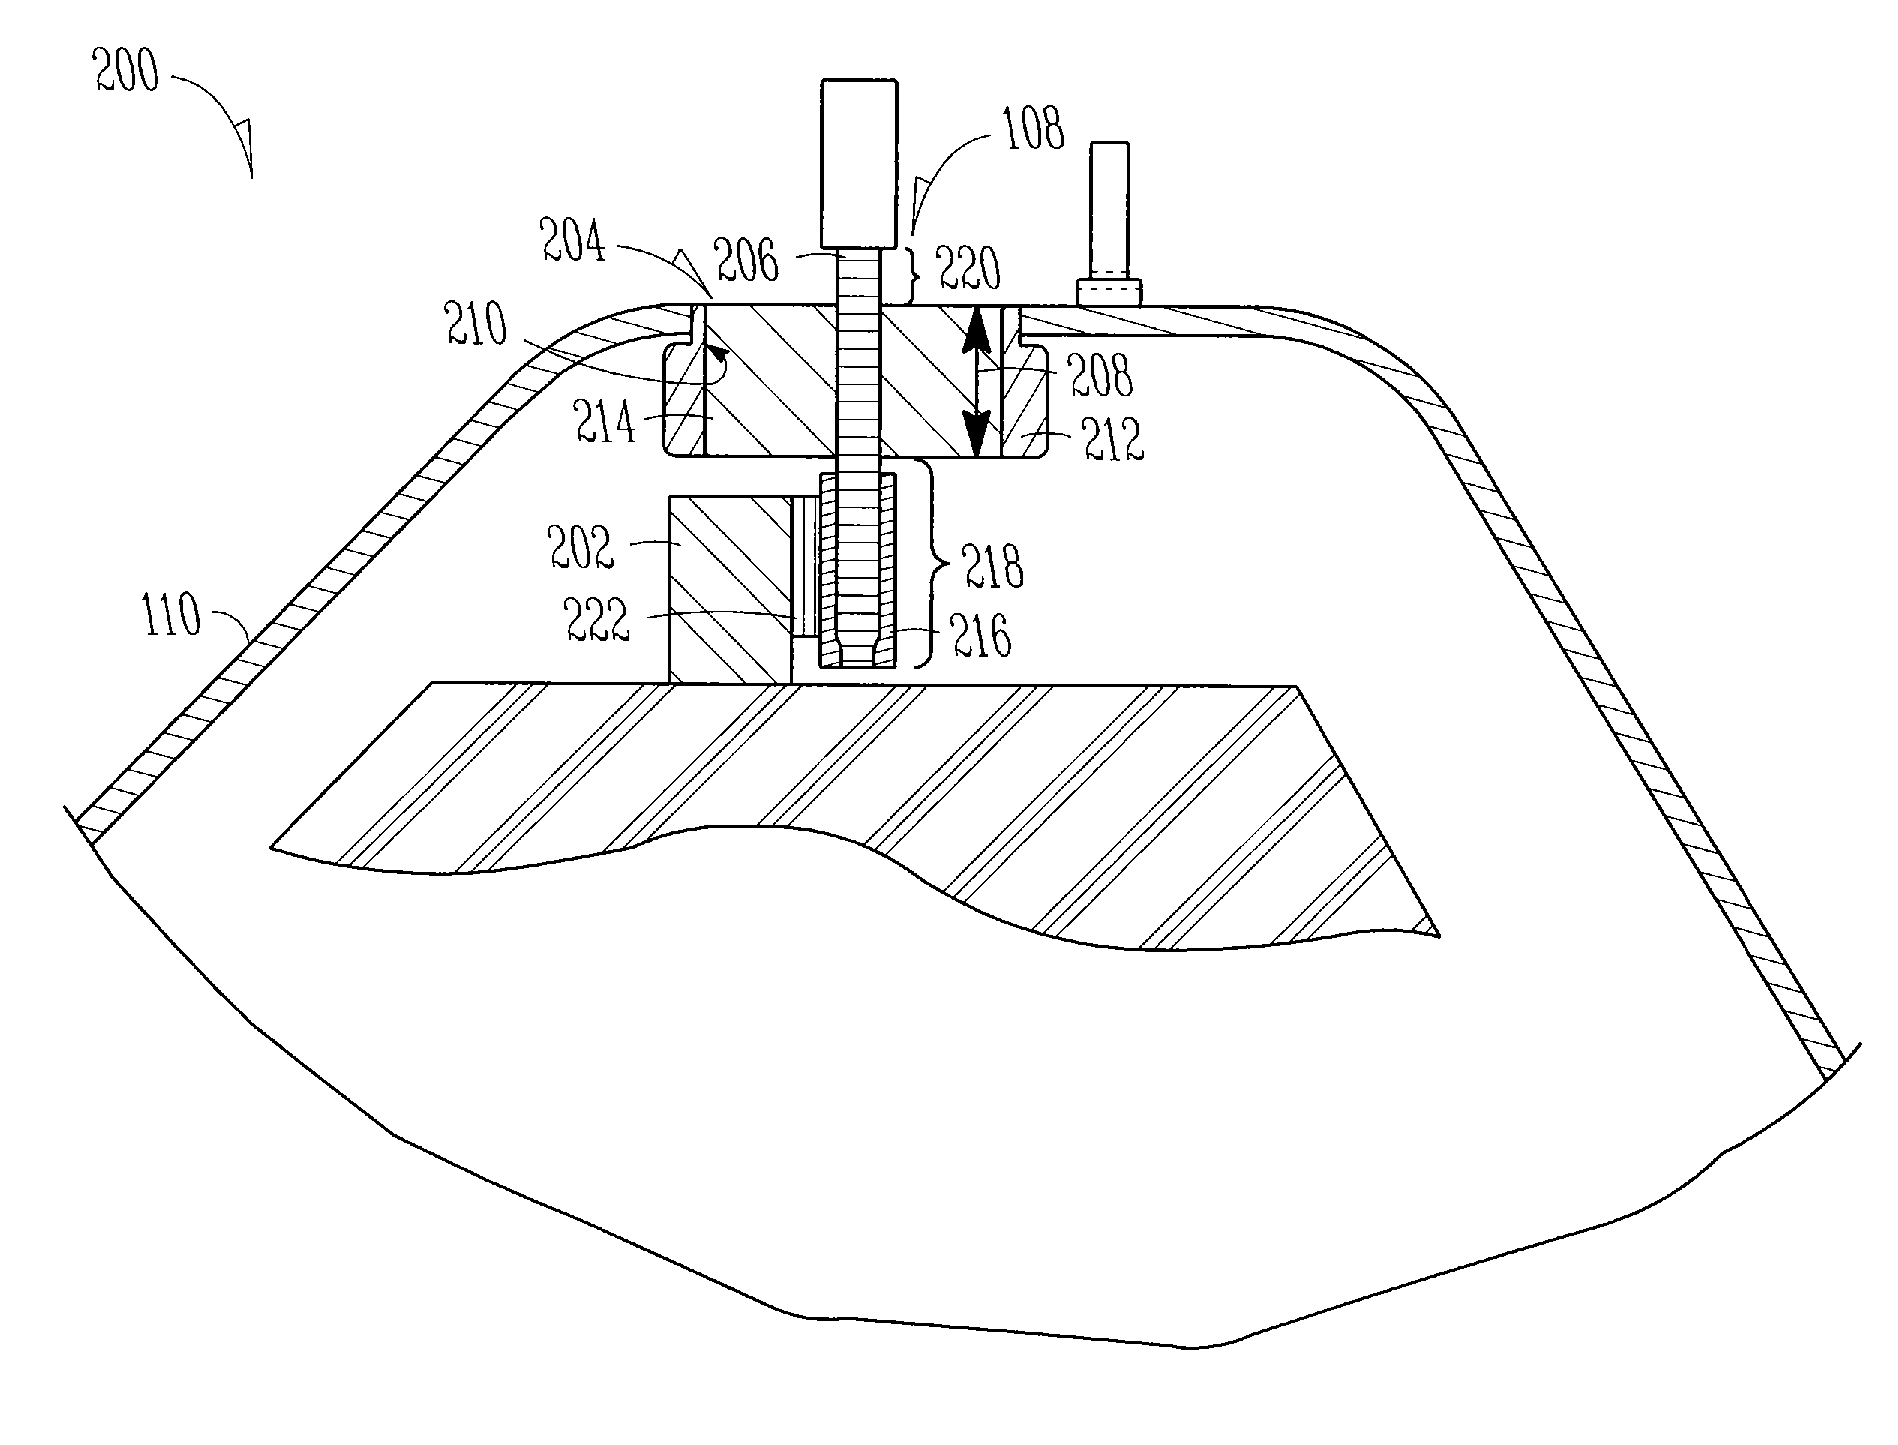 Feedthrough assembly including sleeve and methods related thereto